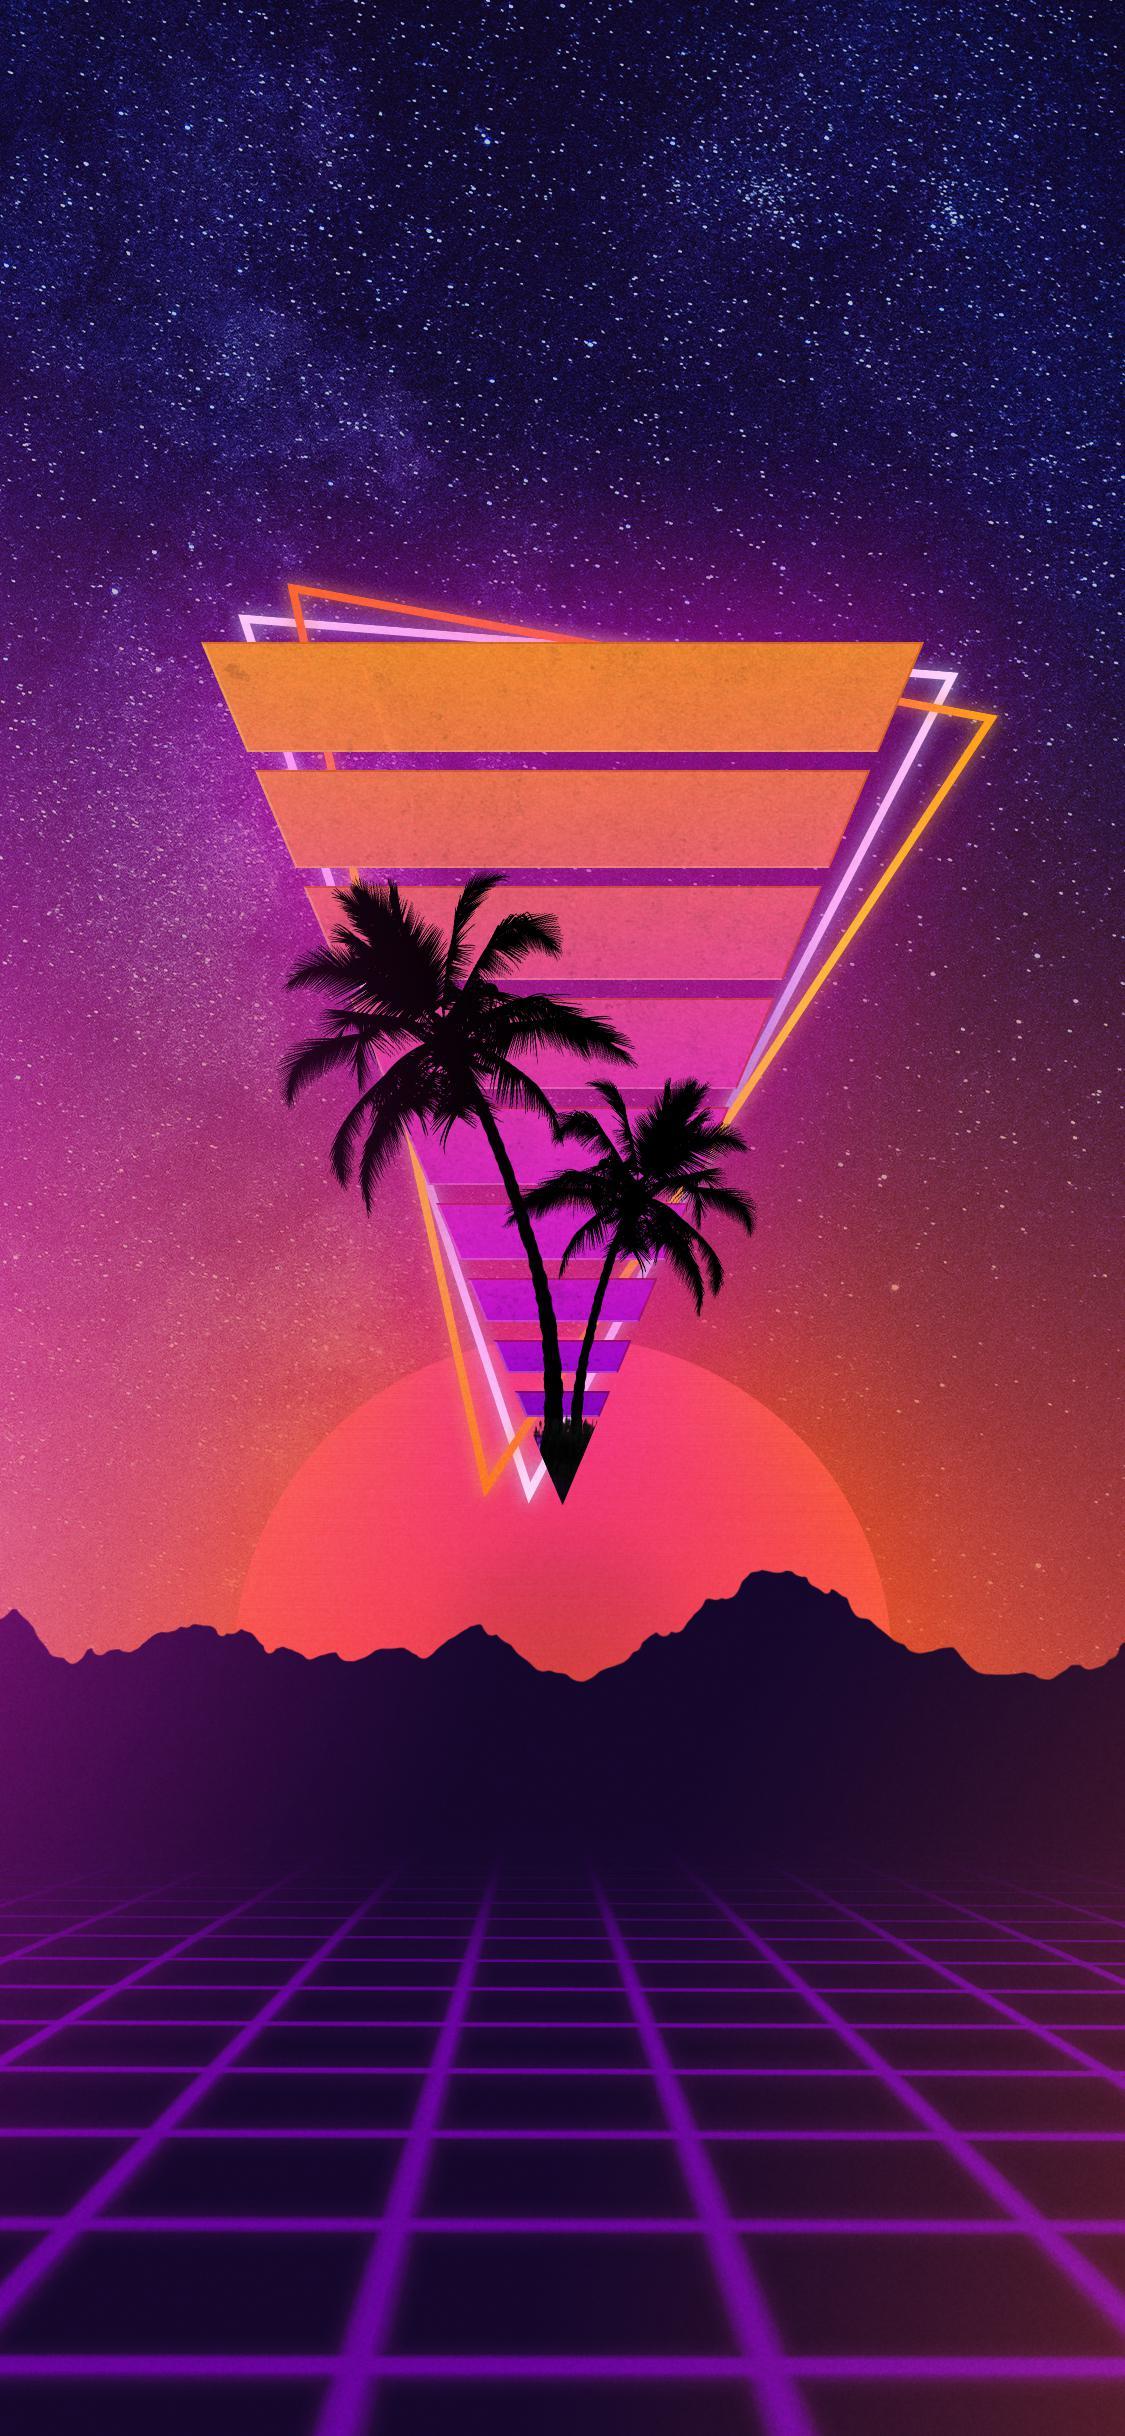 A friend asked me to make a synthwave themed iphone X wallpaper